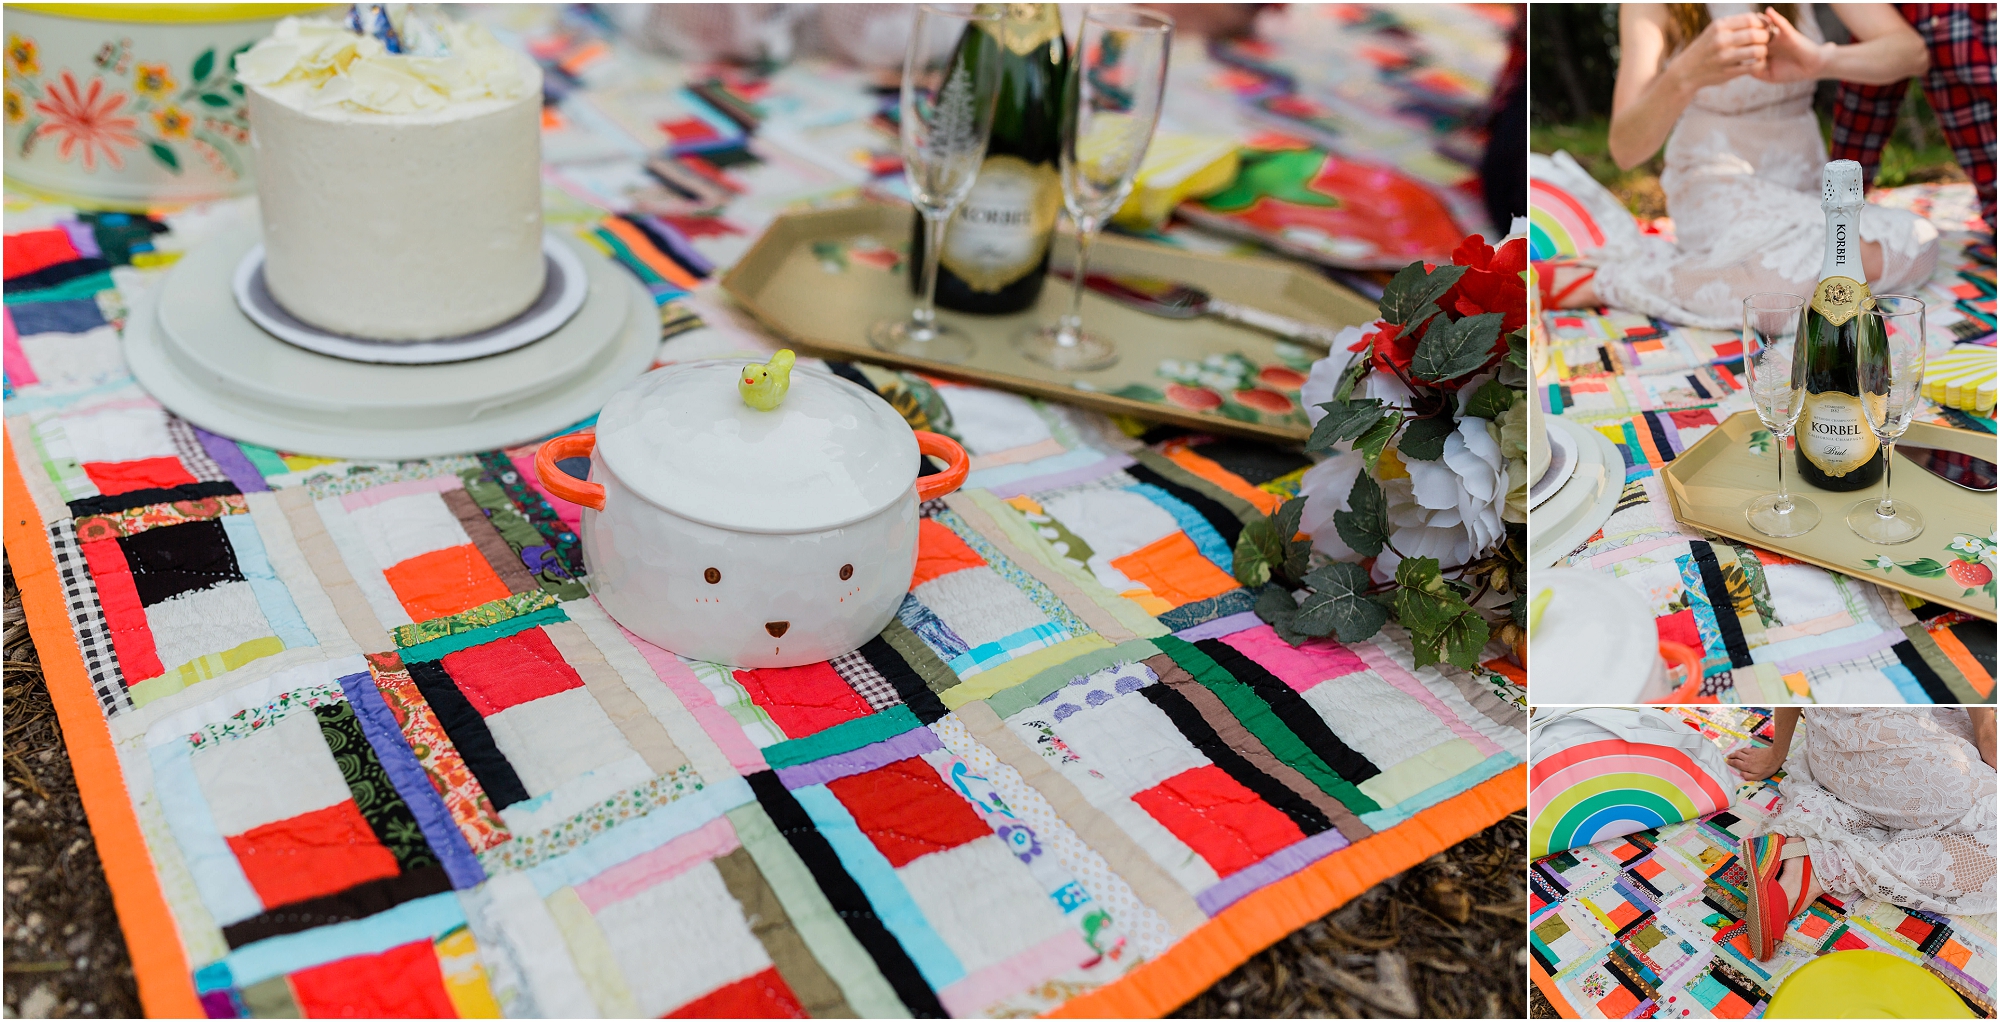 An heirloom patchwork quilt, with oranges, reds, blues, and all colors of the rainbow, is used to create a cozy place for this eclectic wedding couple to spread out their celebratory cake and champagne at their Crater Lake elopement in Oregon. | Erica Swantek Photography